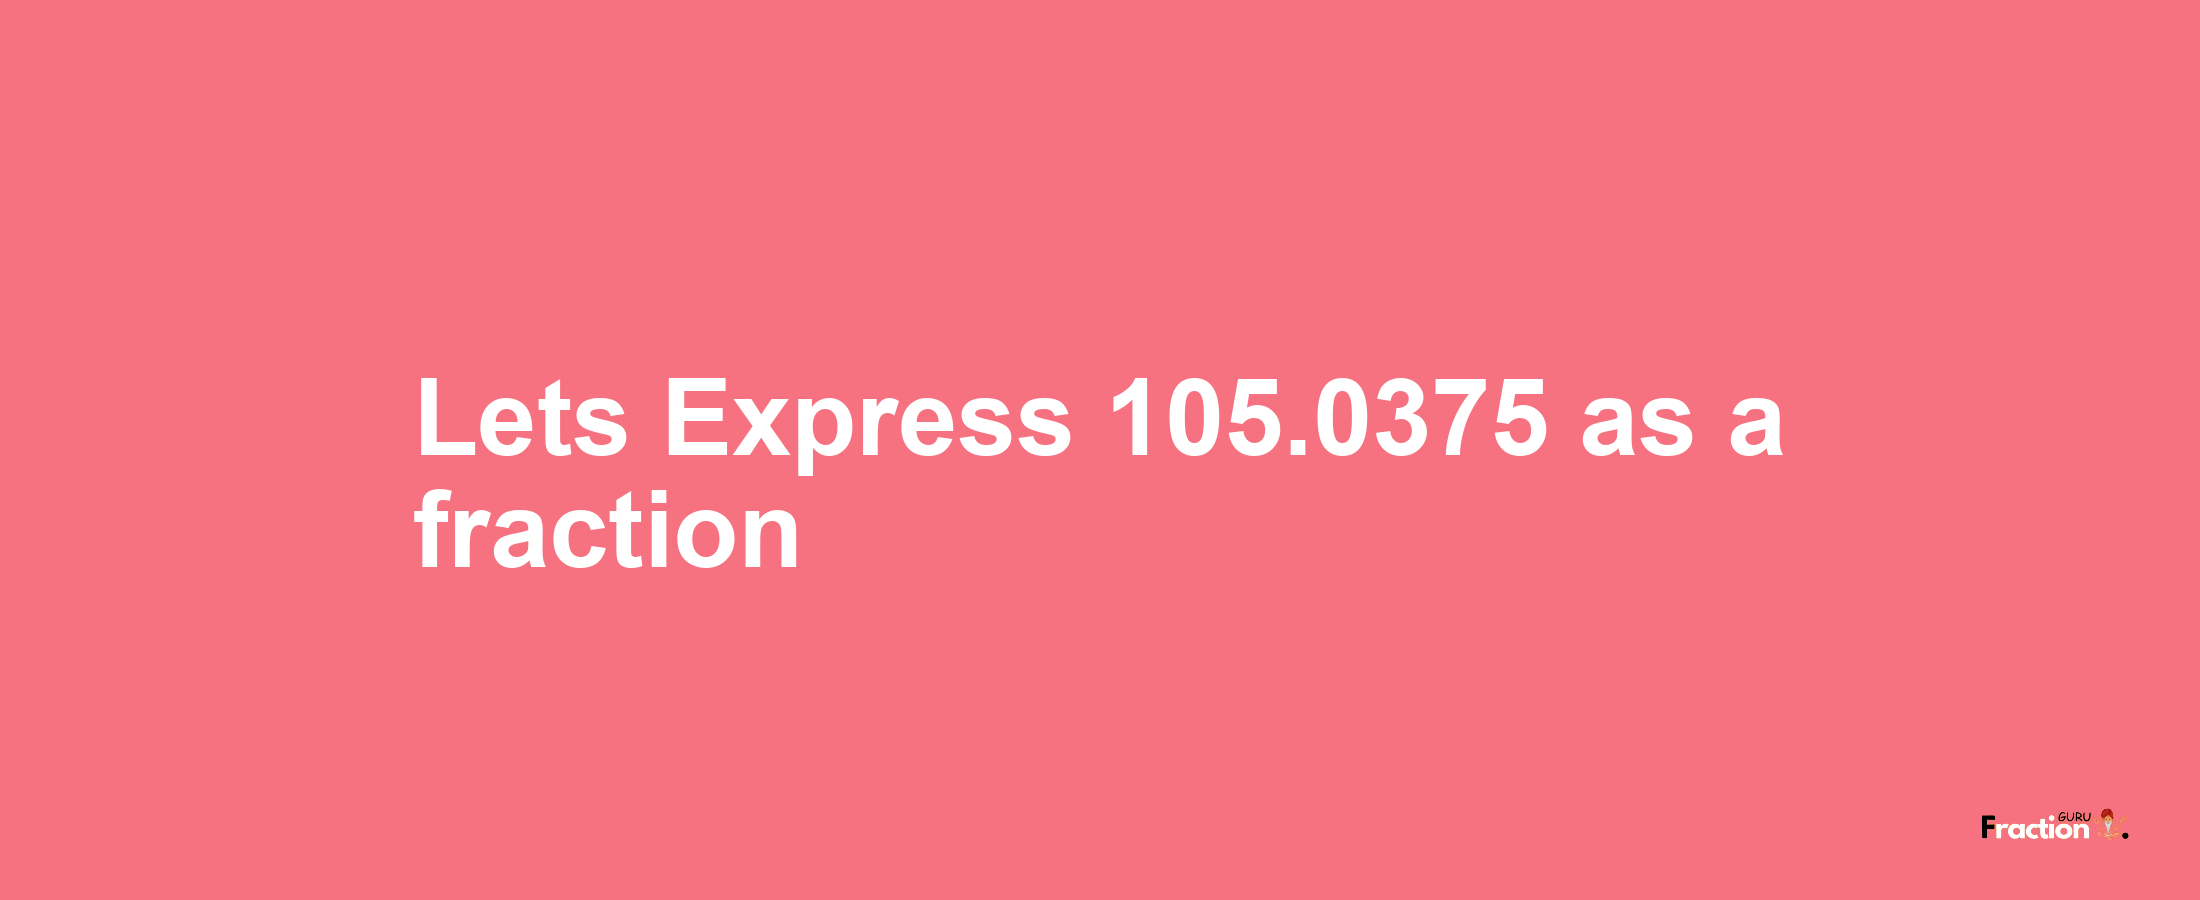 Lets Express 105.0375 as afraction